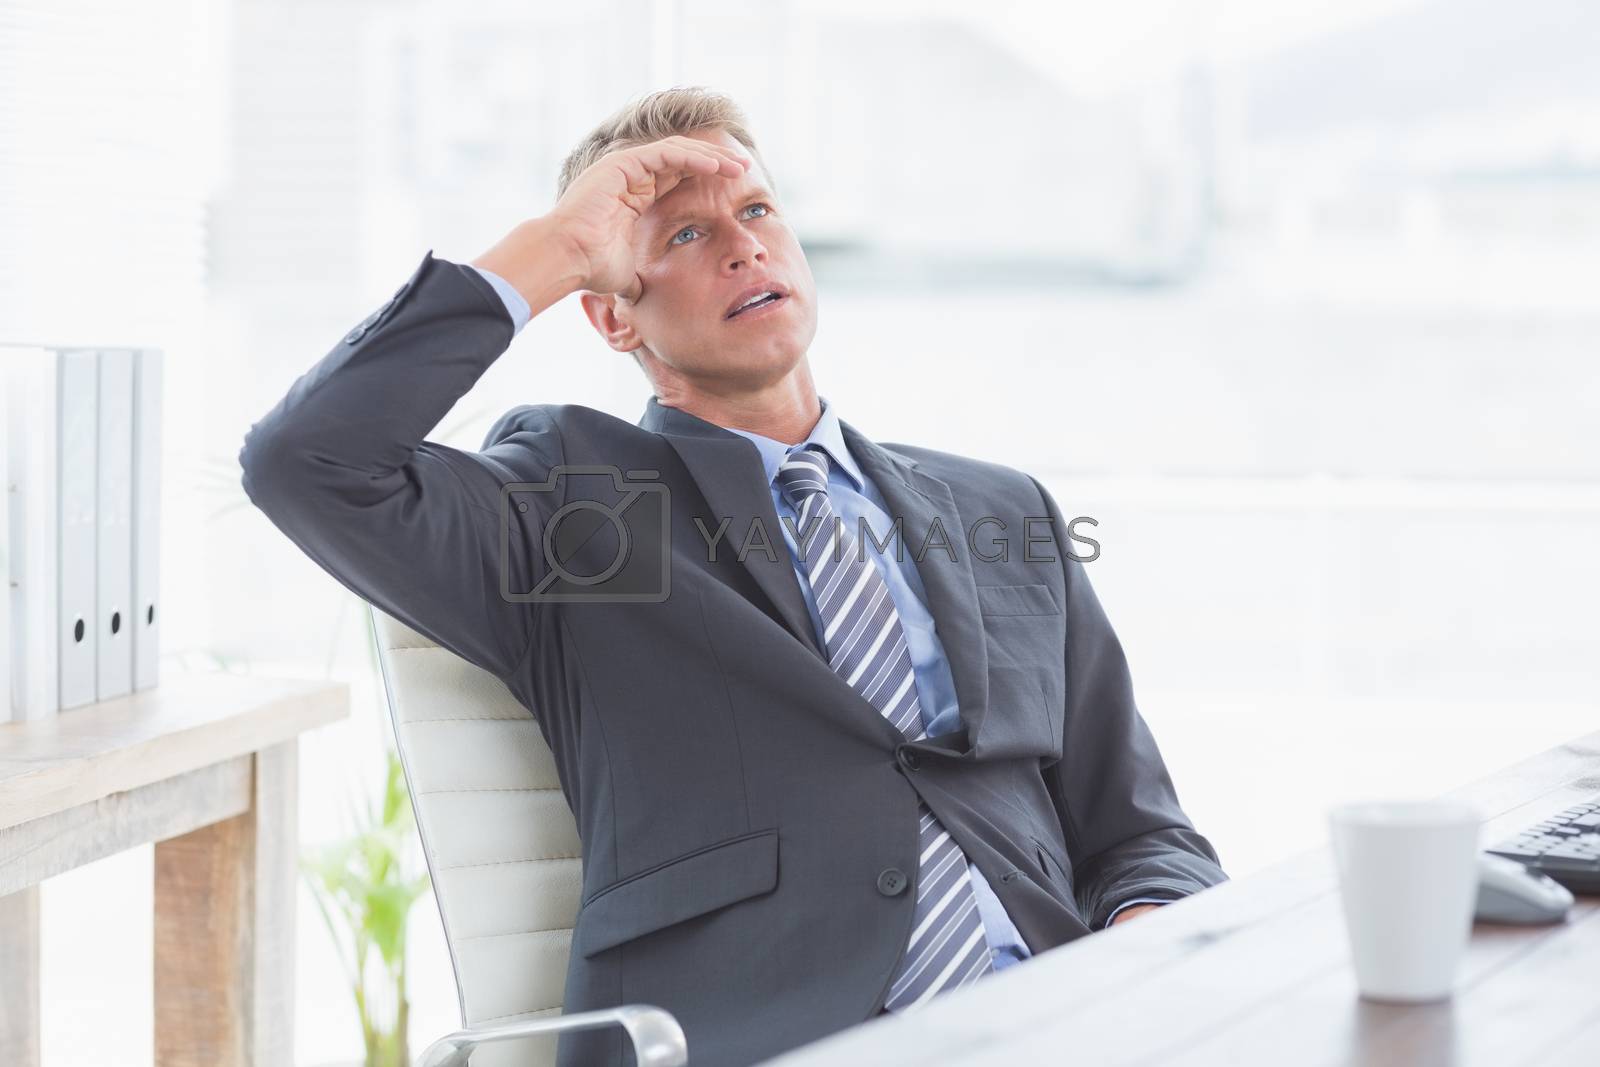 Royalty free image of Businessman with his hand on his forehead by Wavebreakmedia